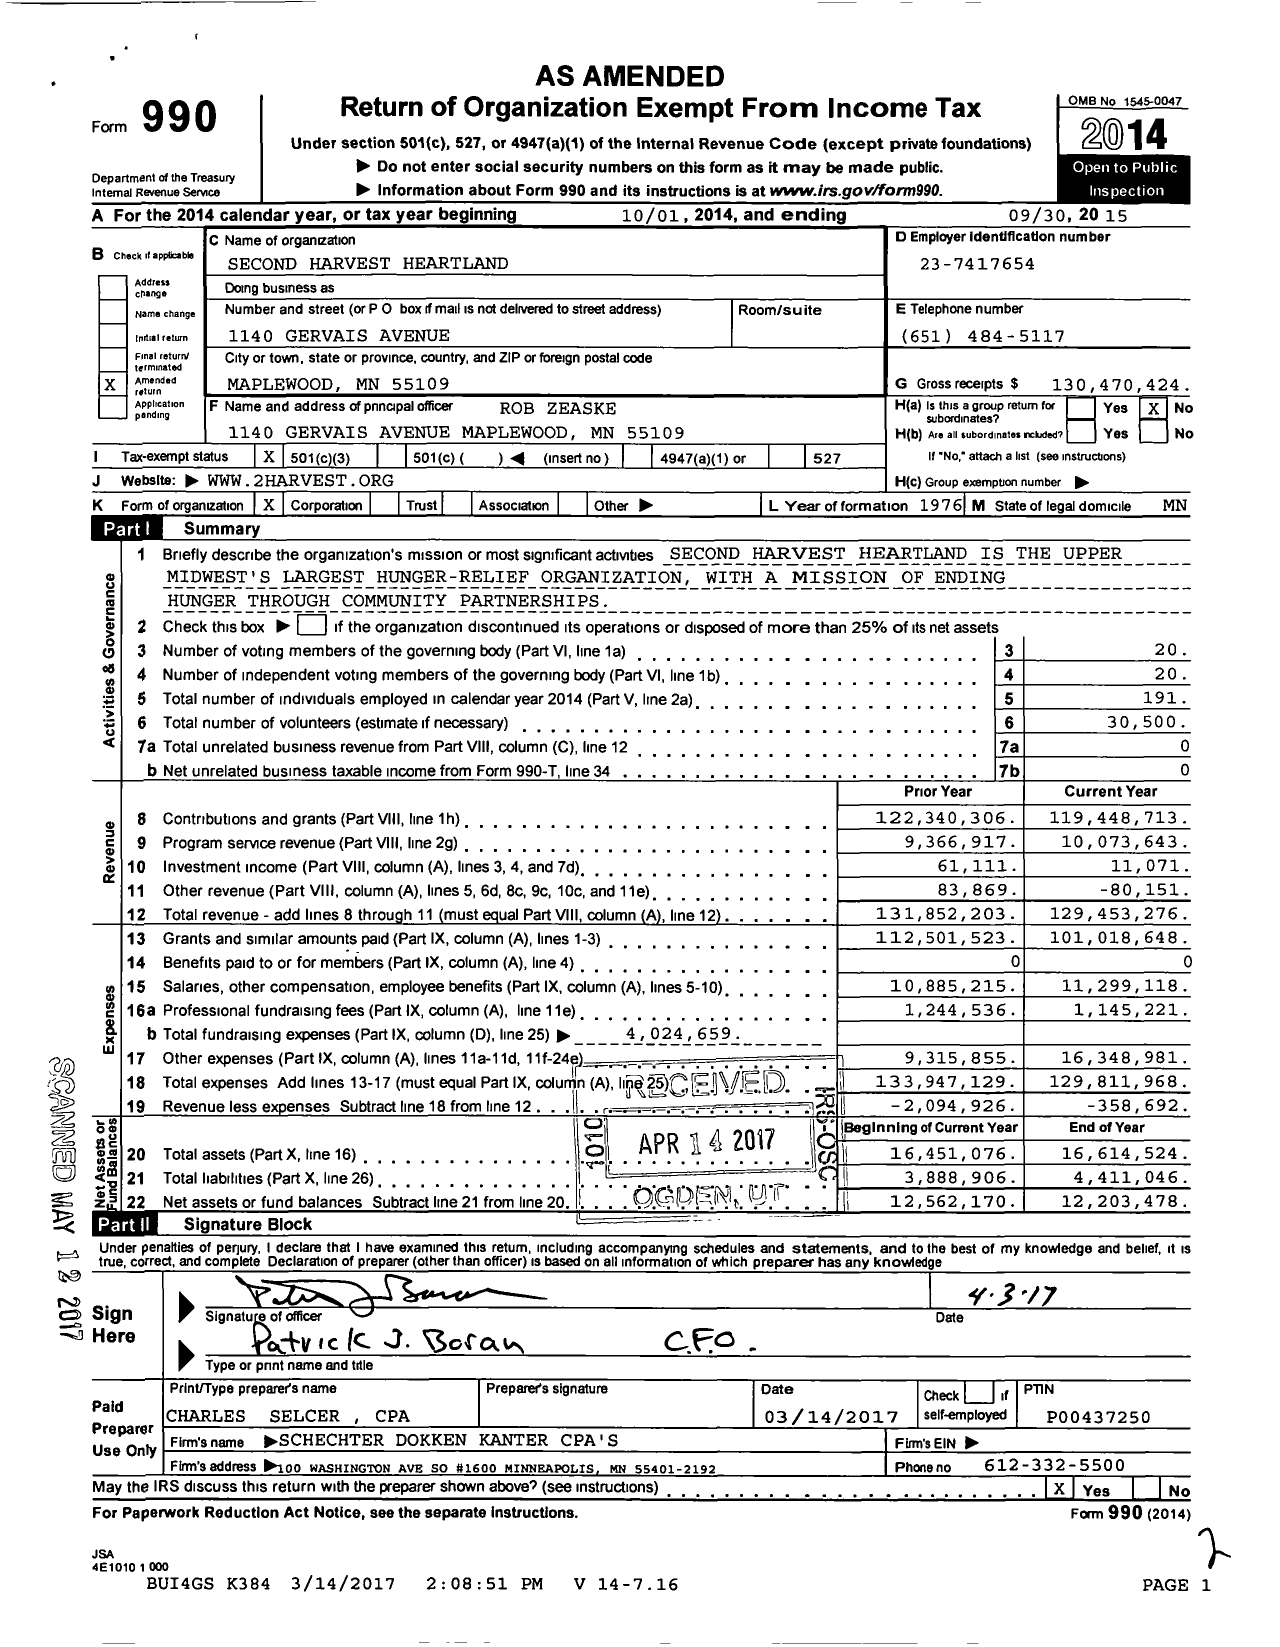 Image of first page of 2014 Form 990 for Second Harvest Heartland